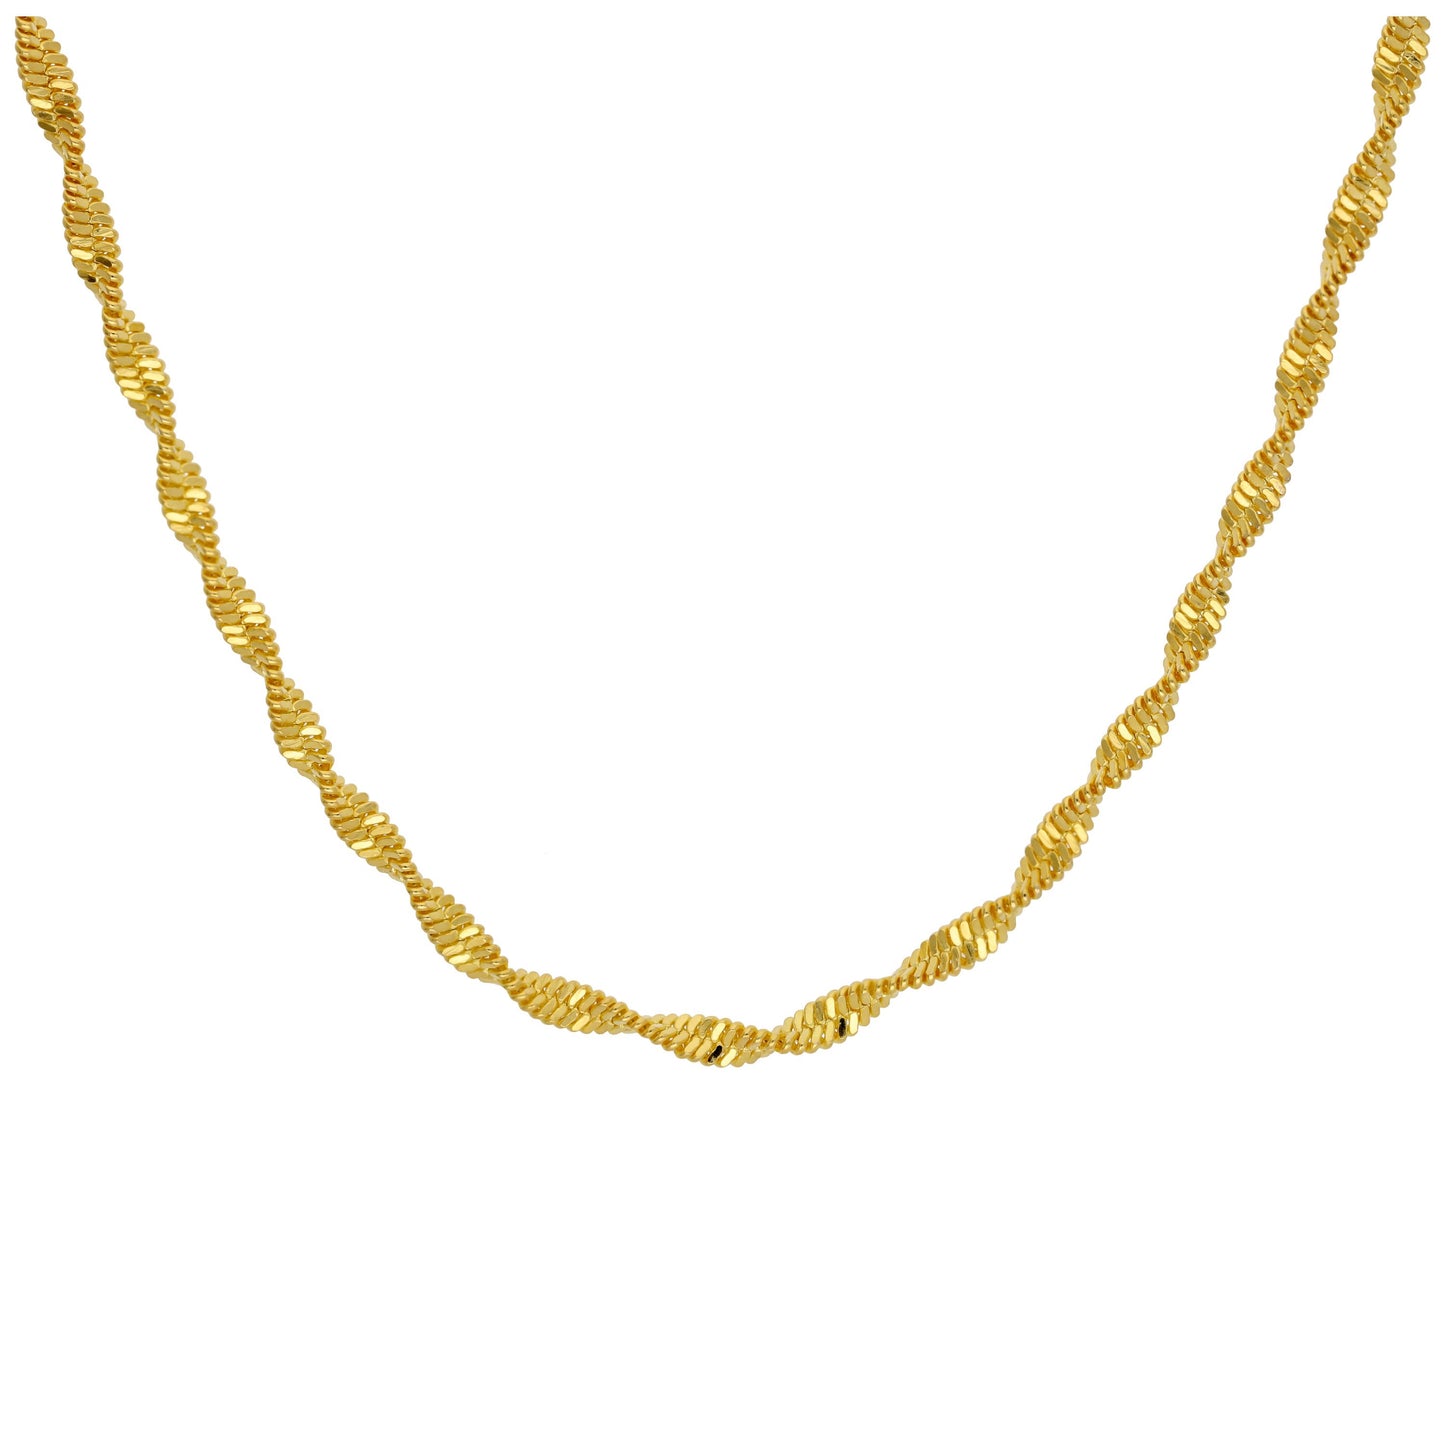 Gold Plated Sterling Silver Twisted Chain Necklace 18 Inches